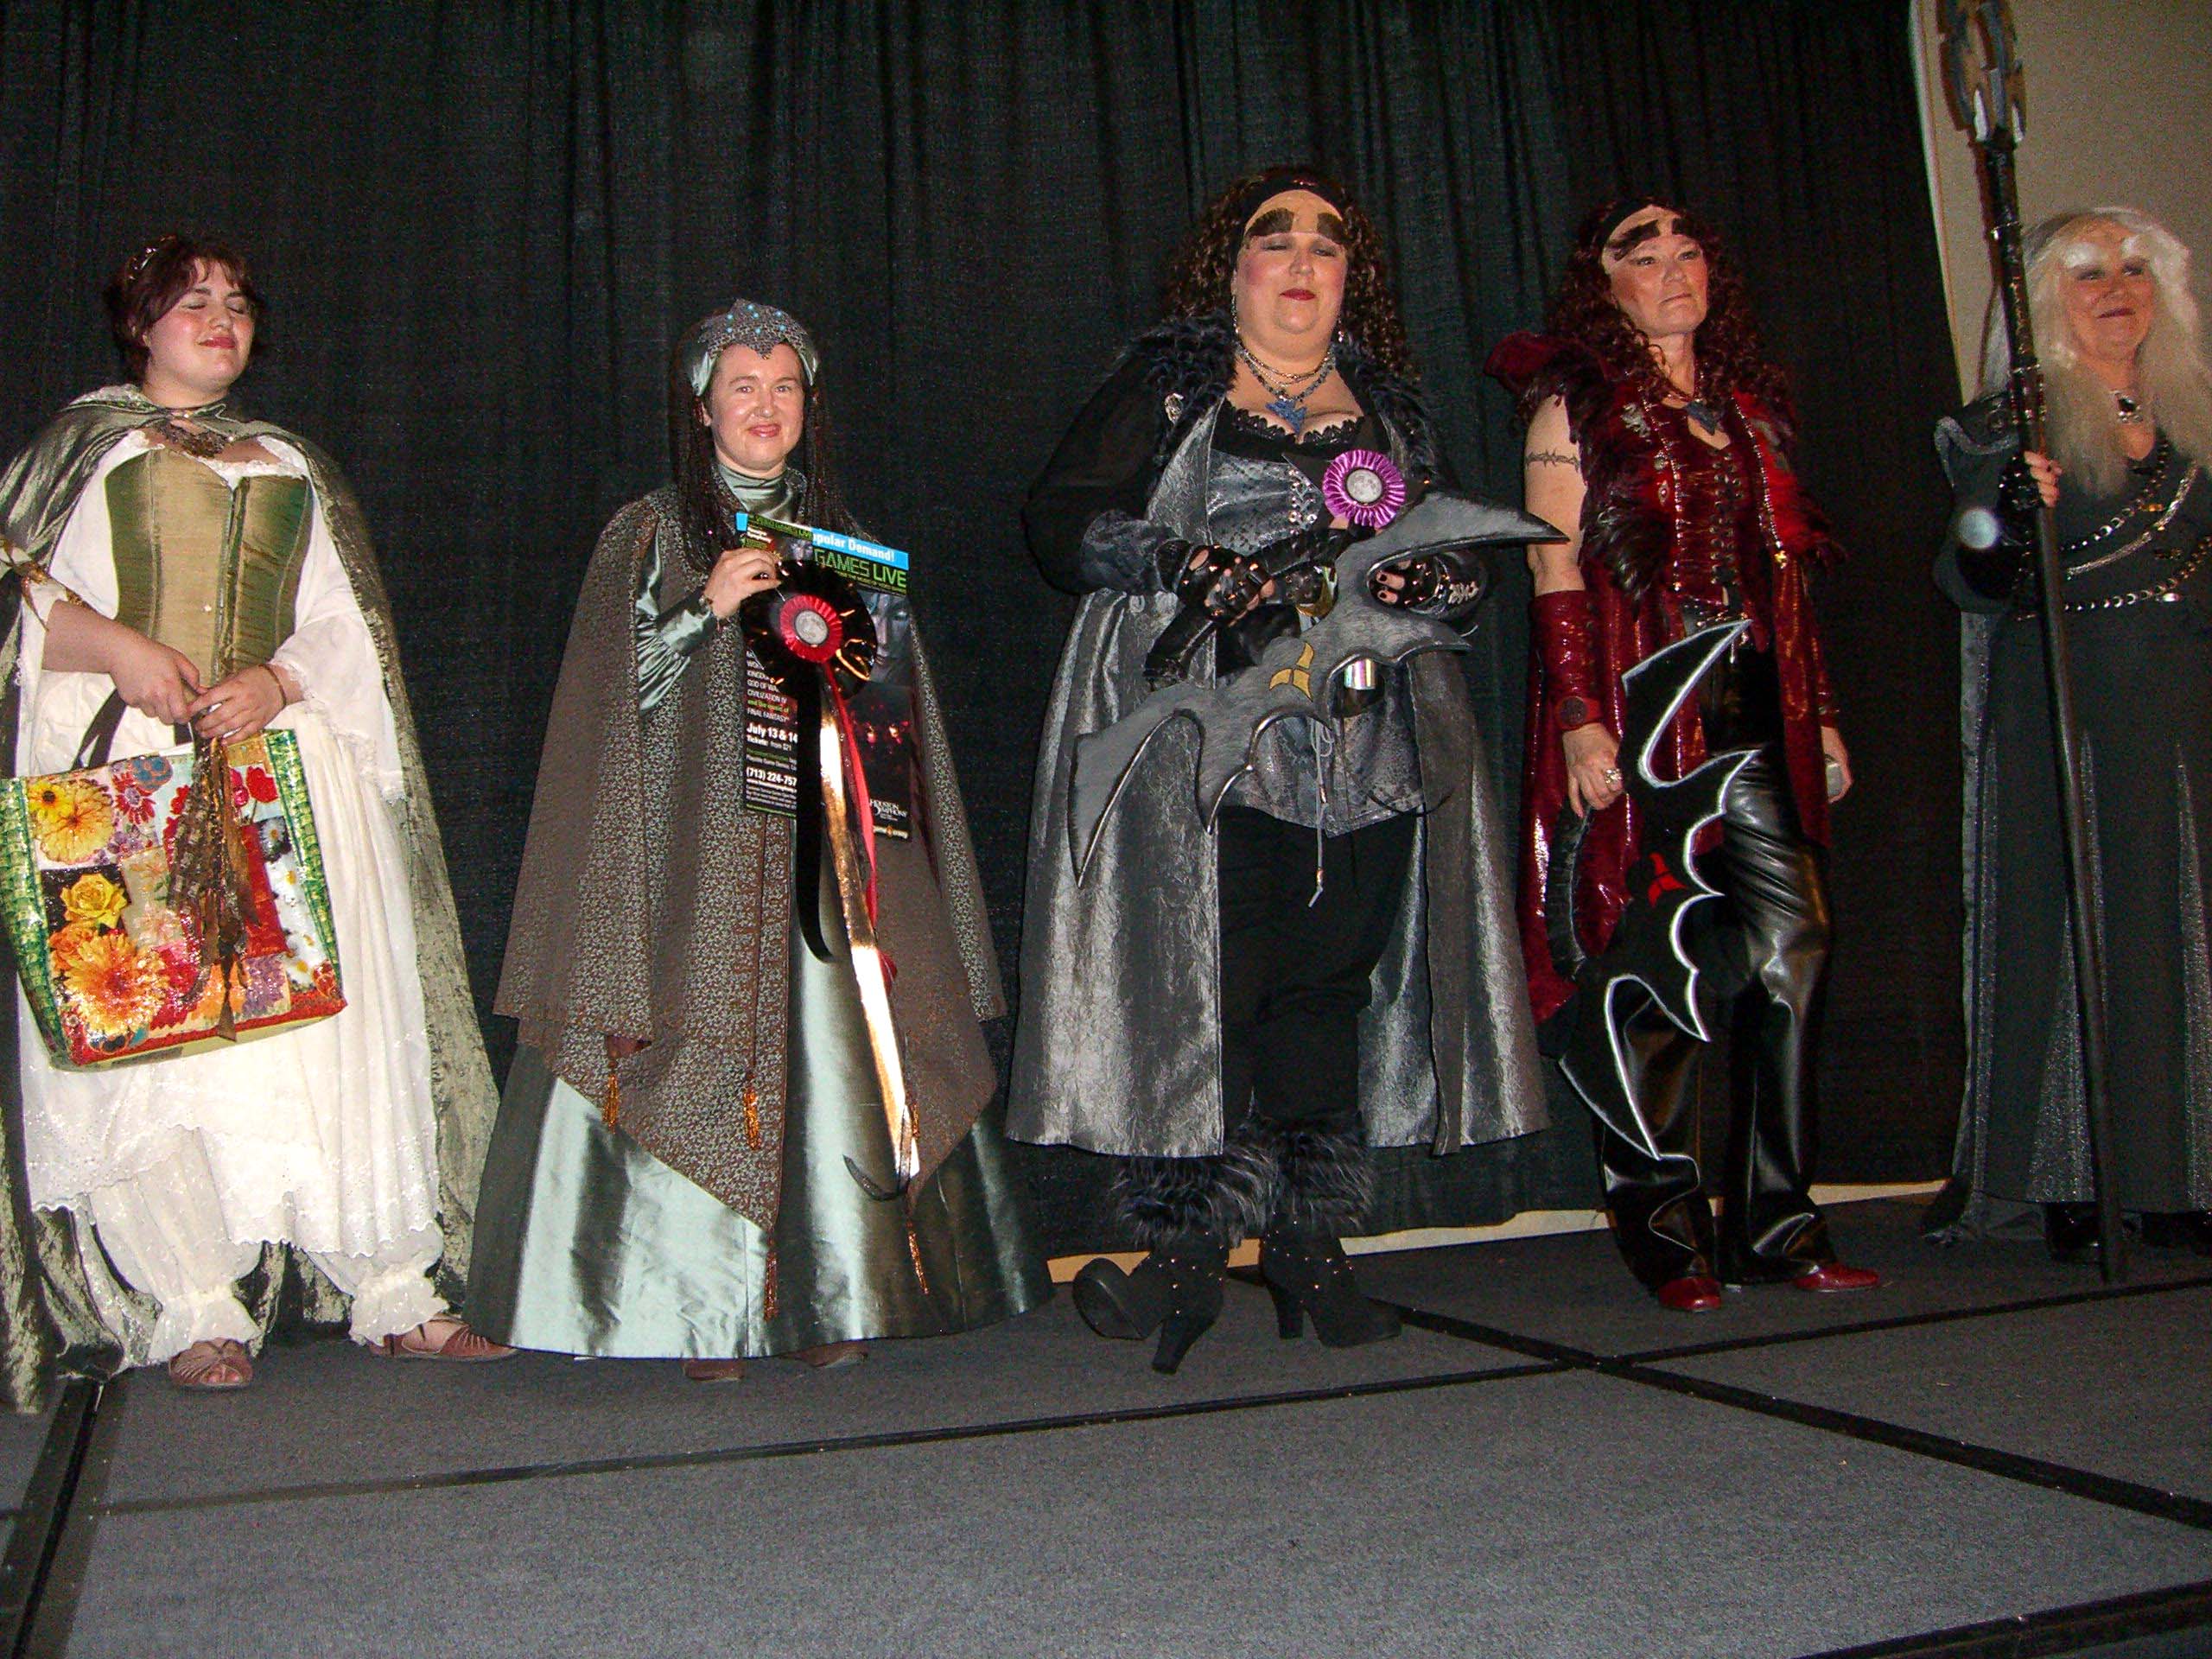 All the ApolloCon 2007 masquerade winners on the stage